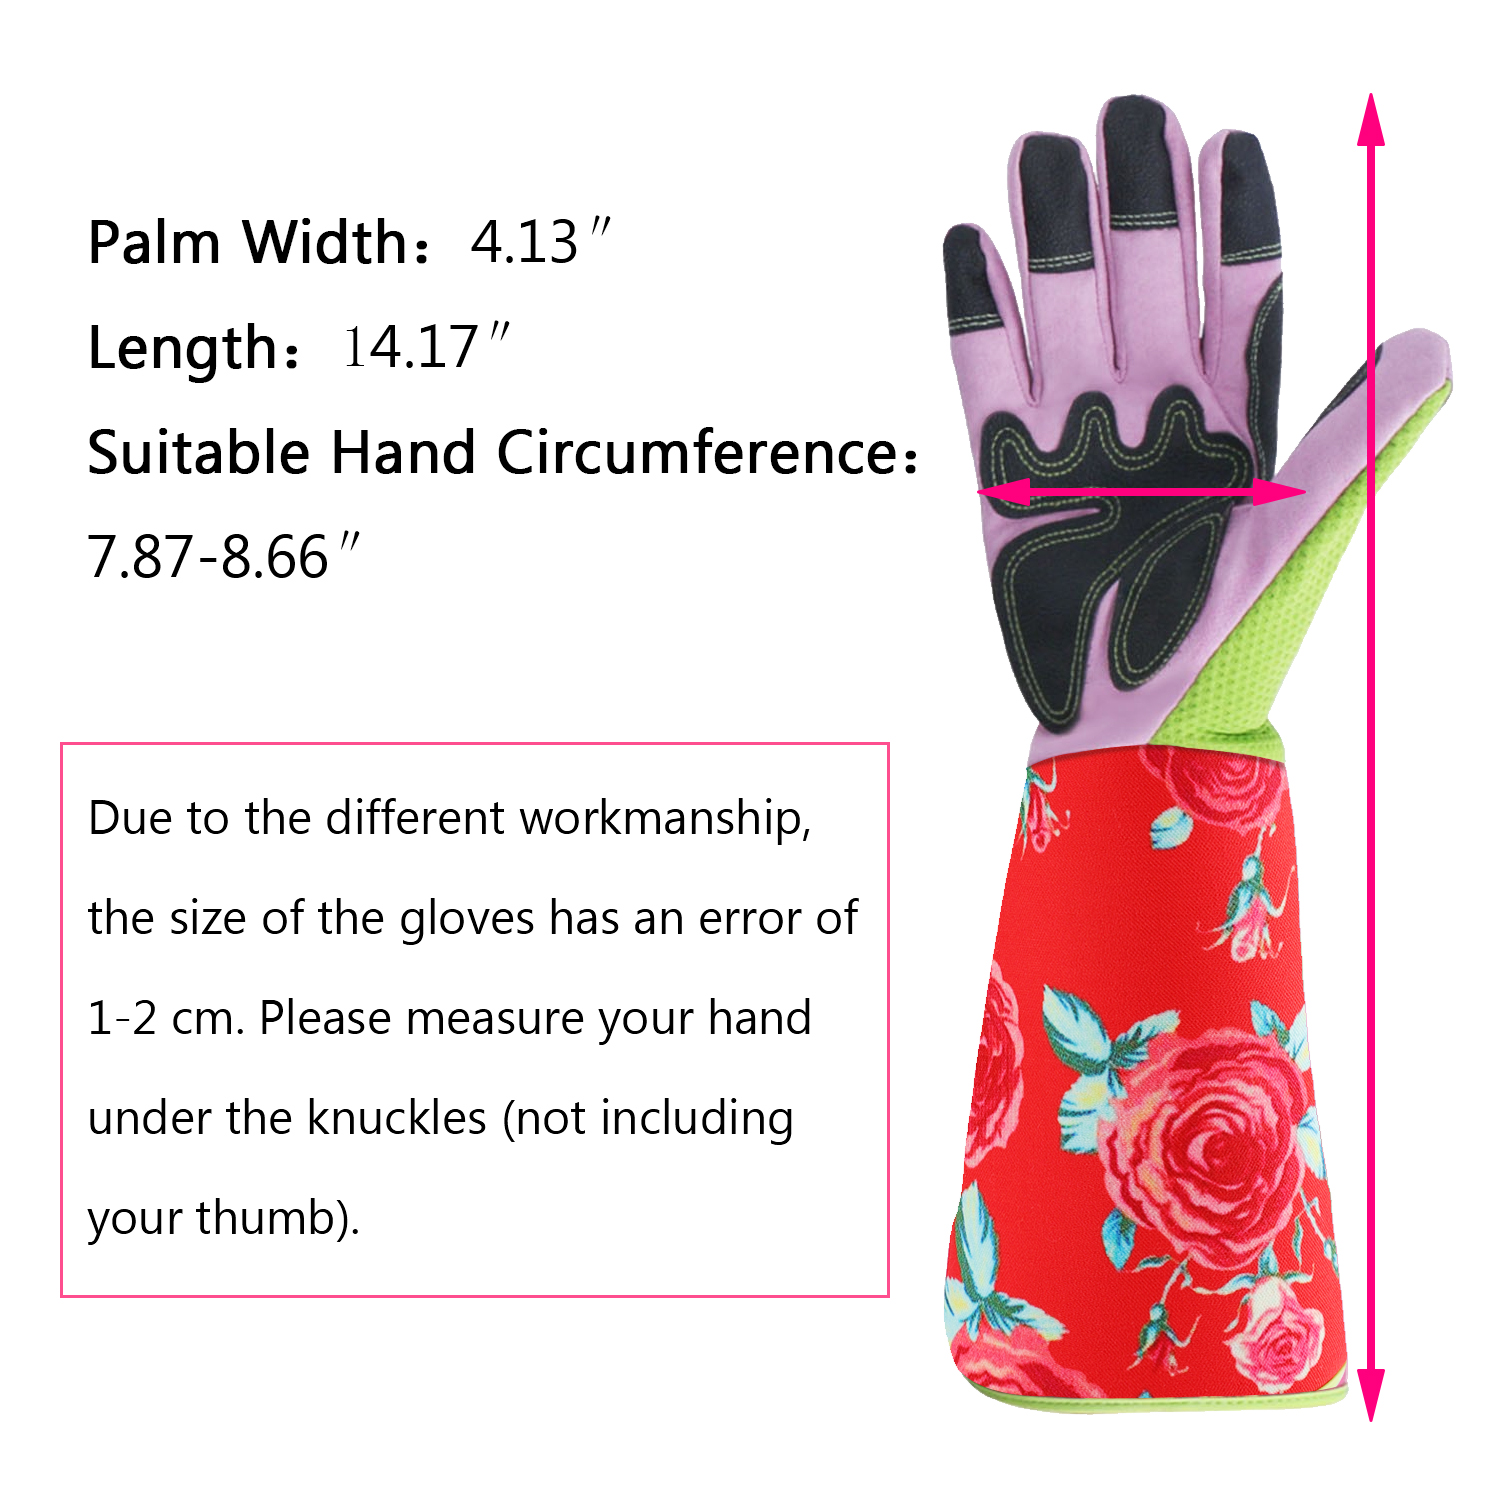 Promise2134 Long Sleeve Gardening Gloves Pruning Thornproof Garden Gloves with Extra Long Forearm Protection for Gardener Puncture Resistant 